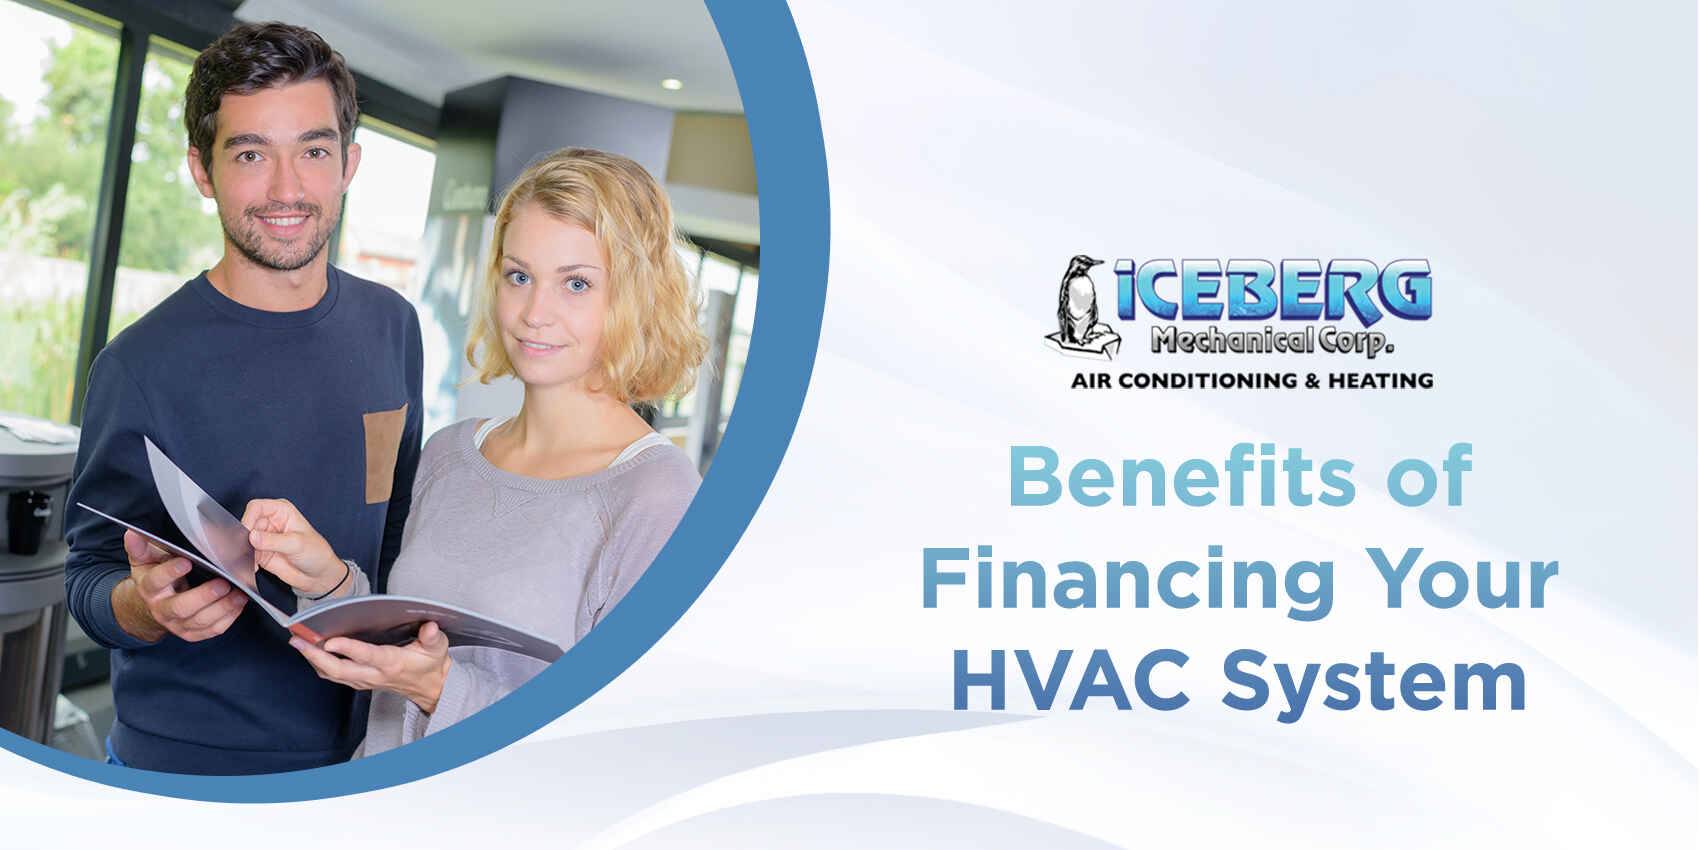 Benefits of Financing Your HVAC System